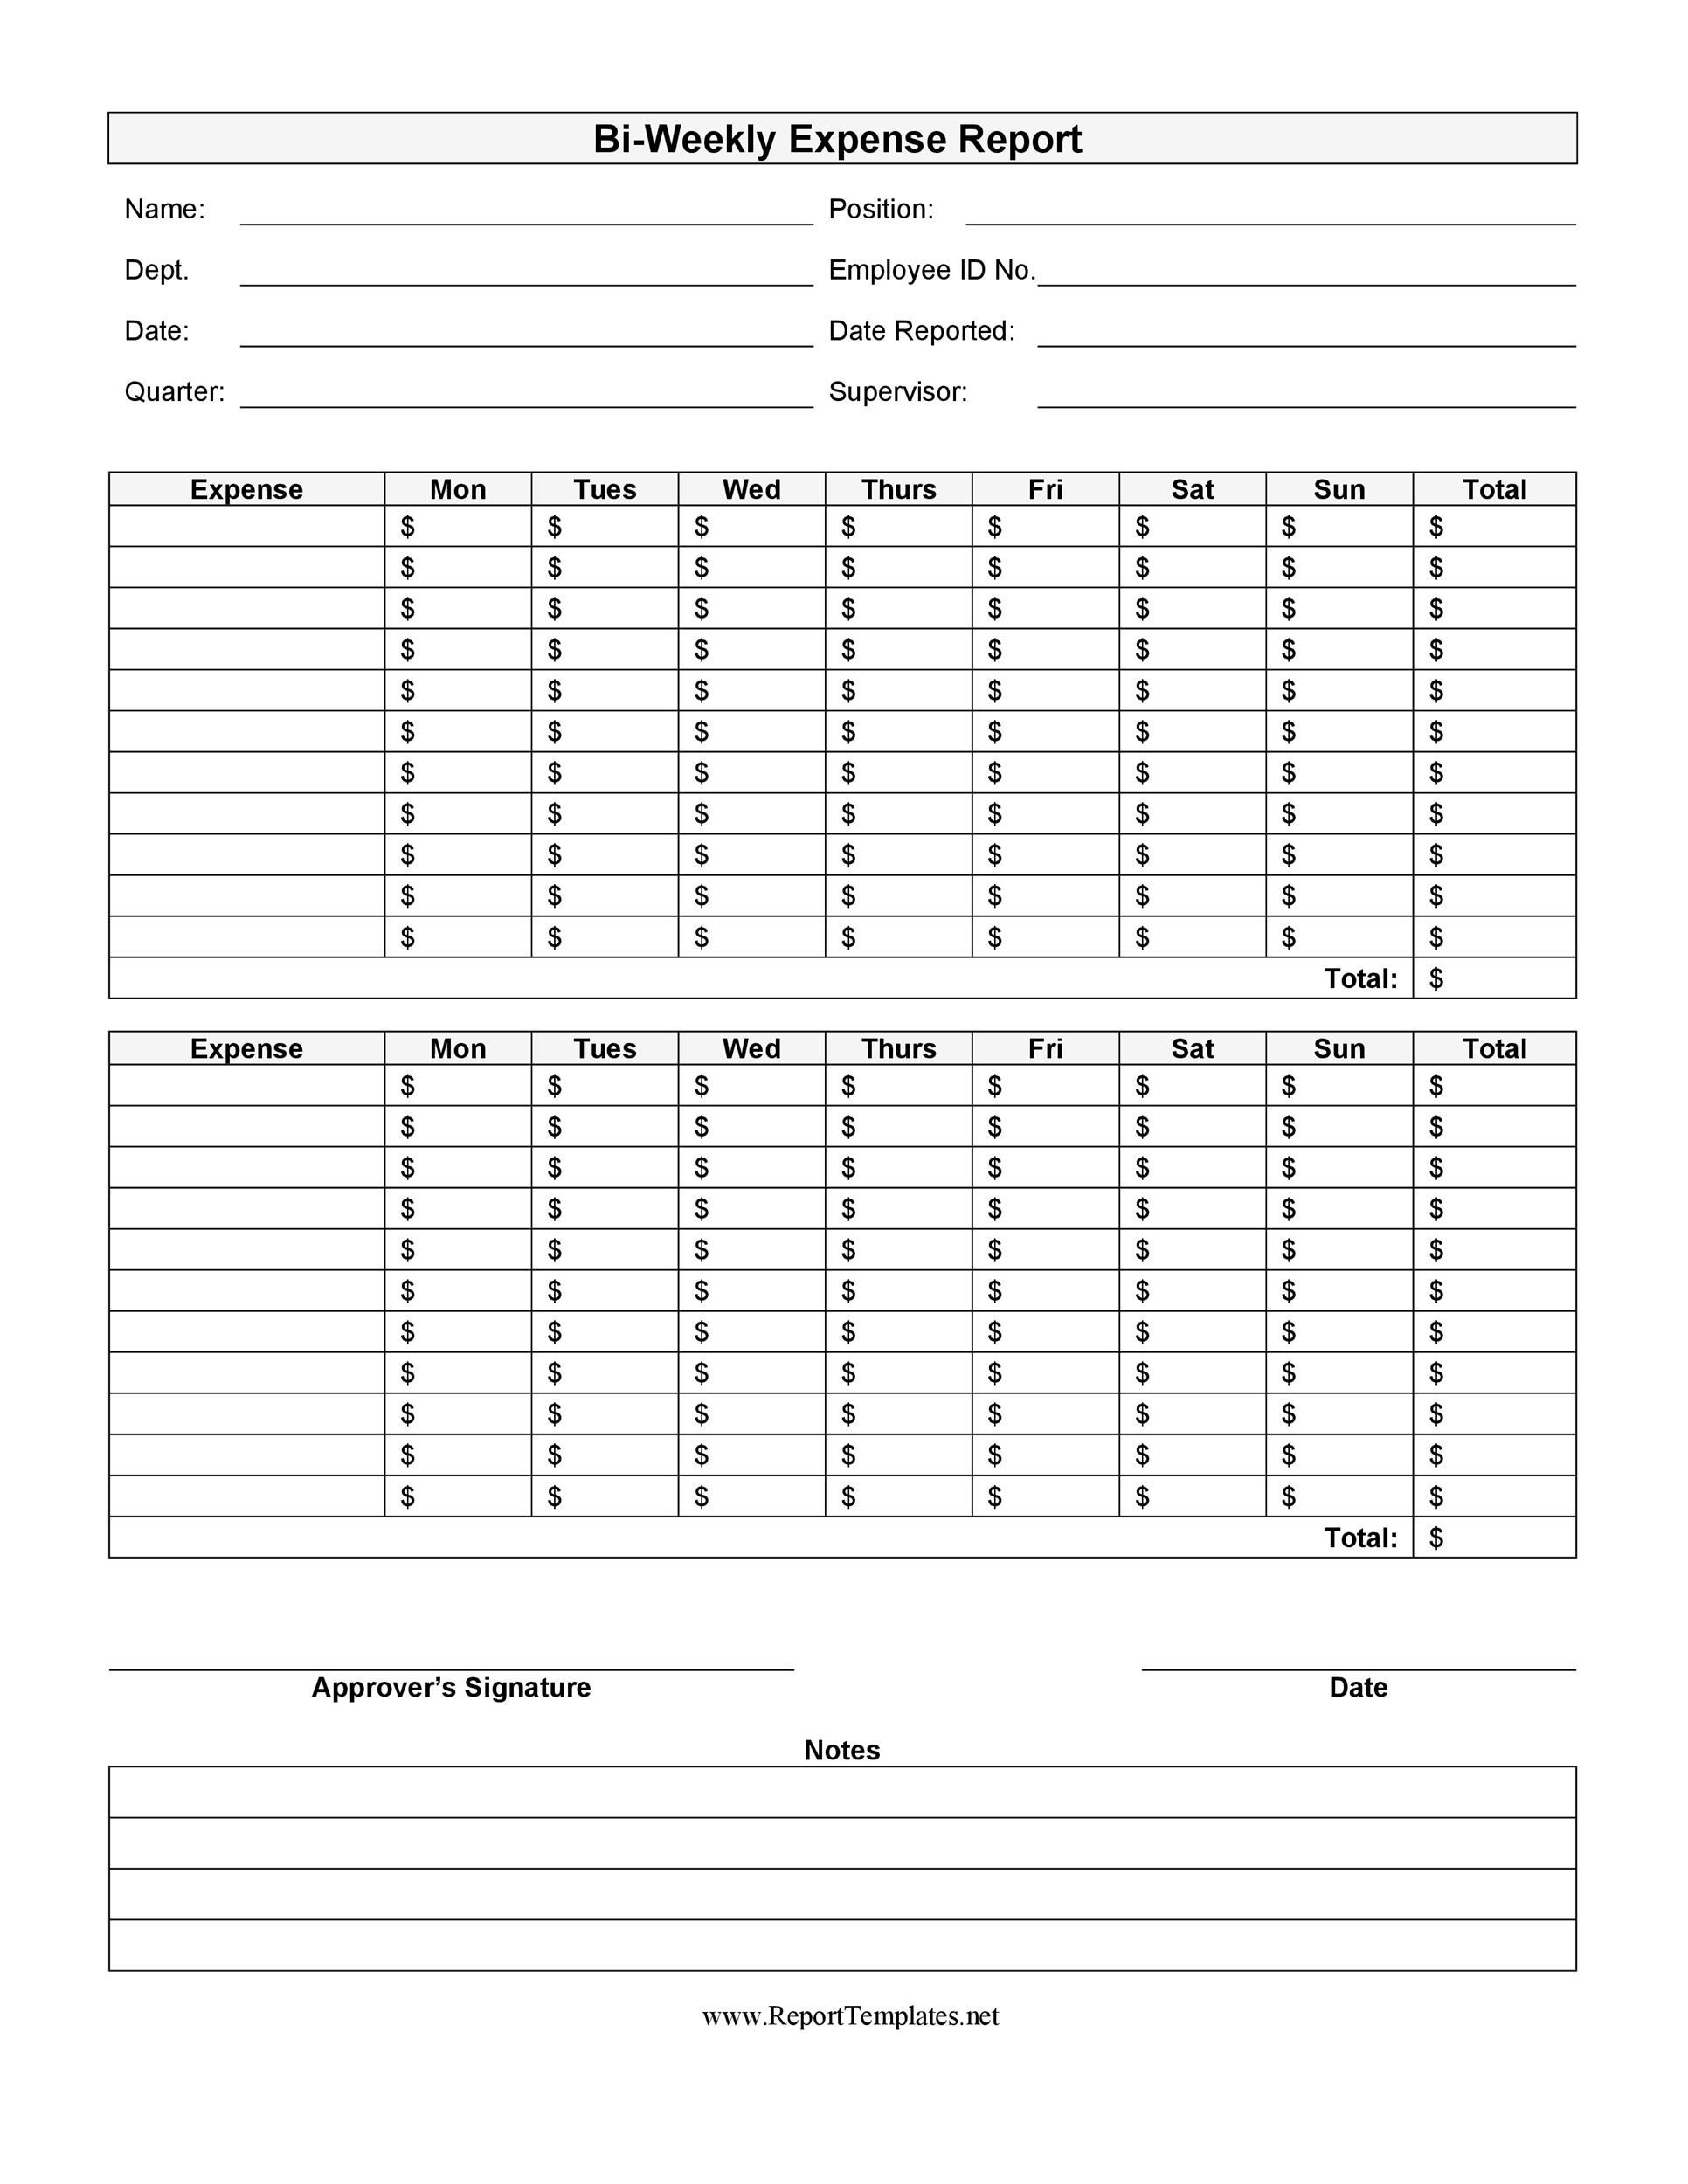 Expense Reports Template from templatelab.com